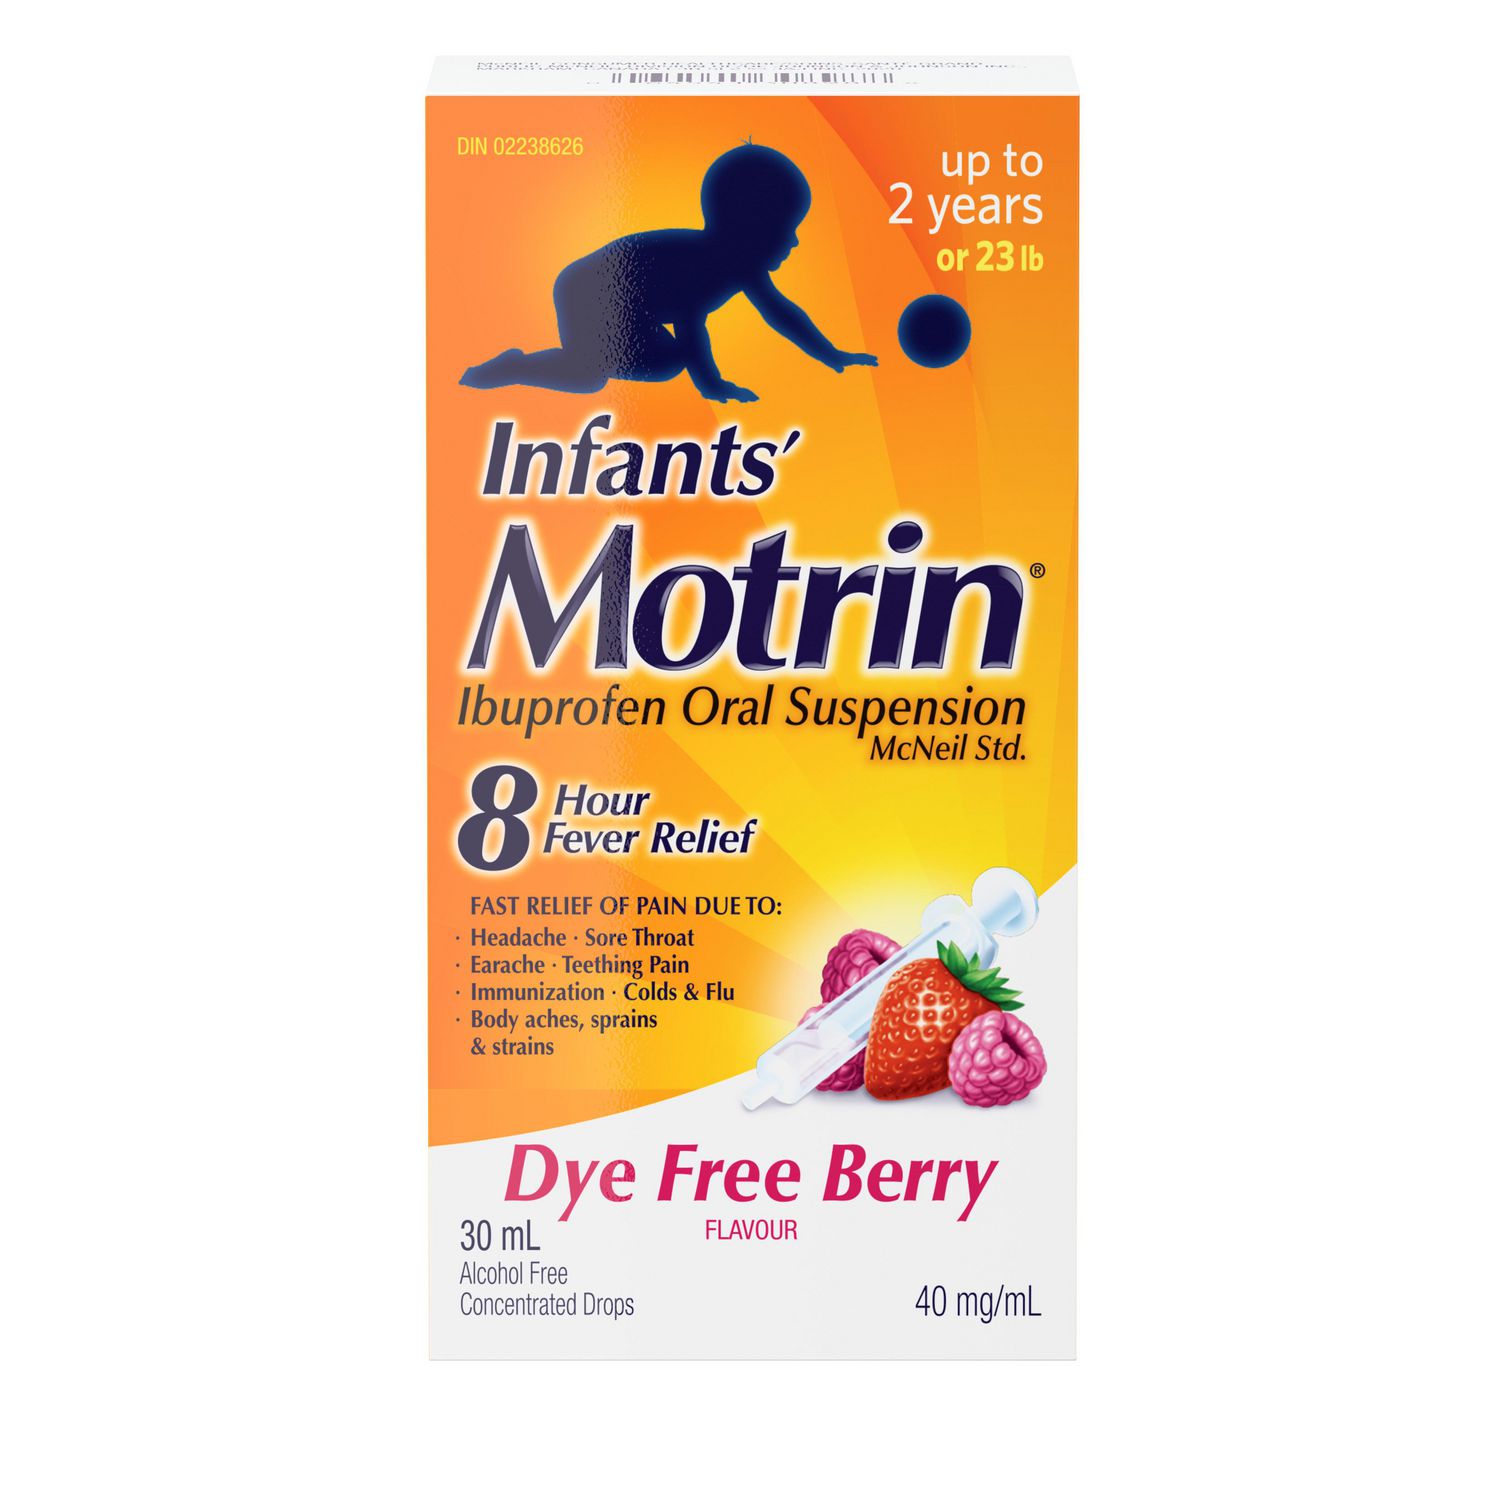 Motrin Infants Medicine For Fever And Pain Dye Free Berry Flavour